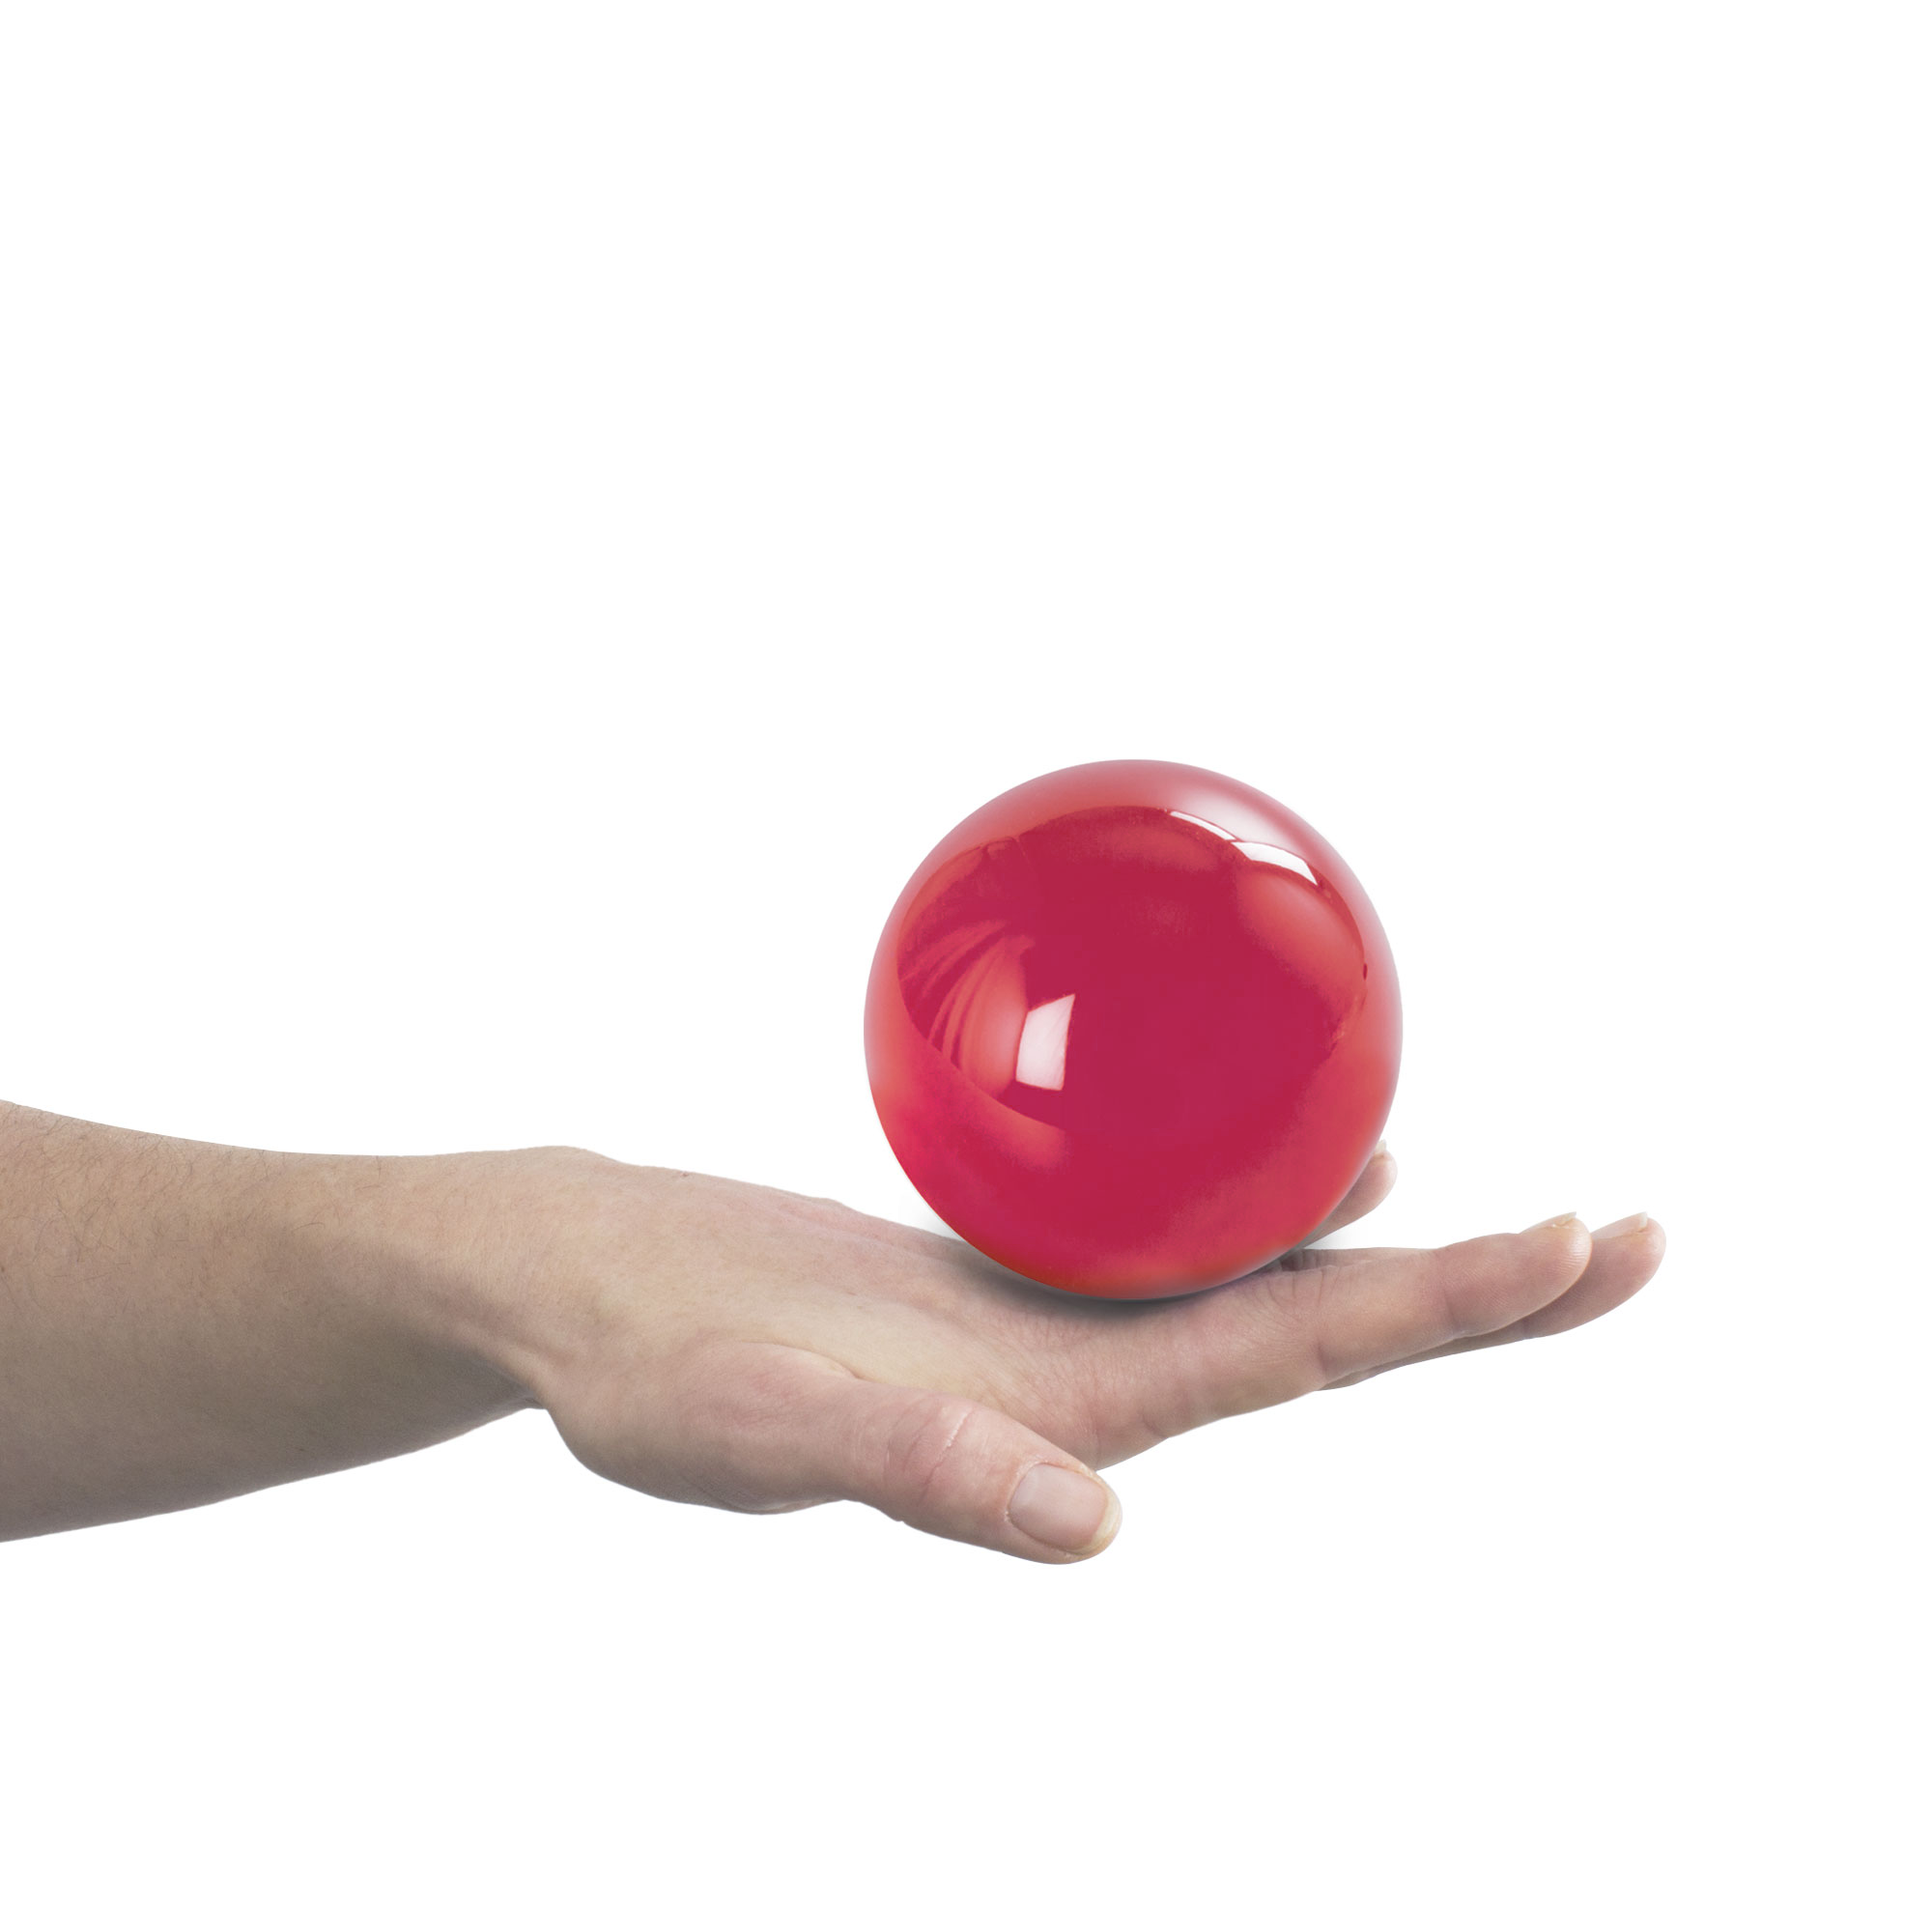 90mm red contact ball balanced on hand